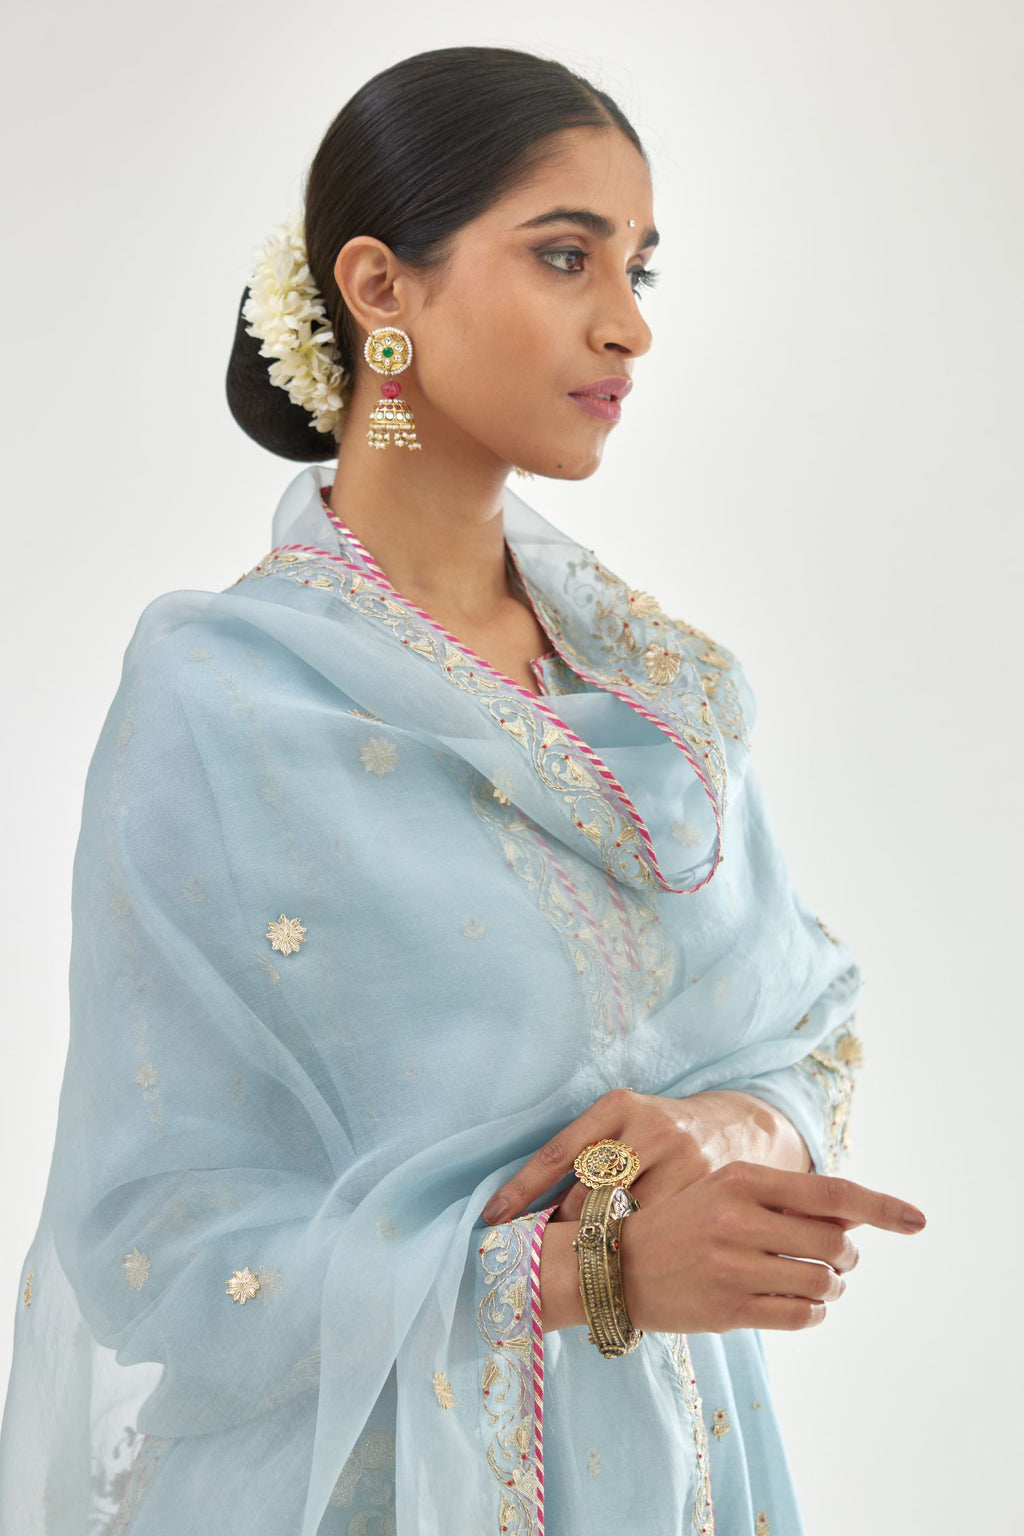 Blue silk chanderi short kalidar kurta set with all-over delicate zari bootis, detailed with dori embroidery and contrast bead work.